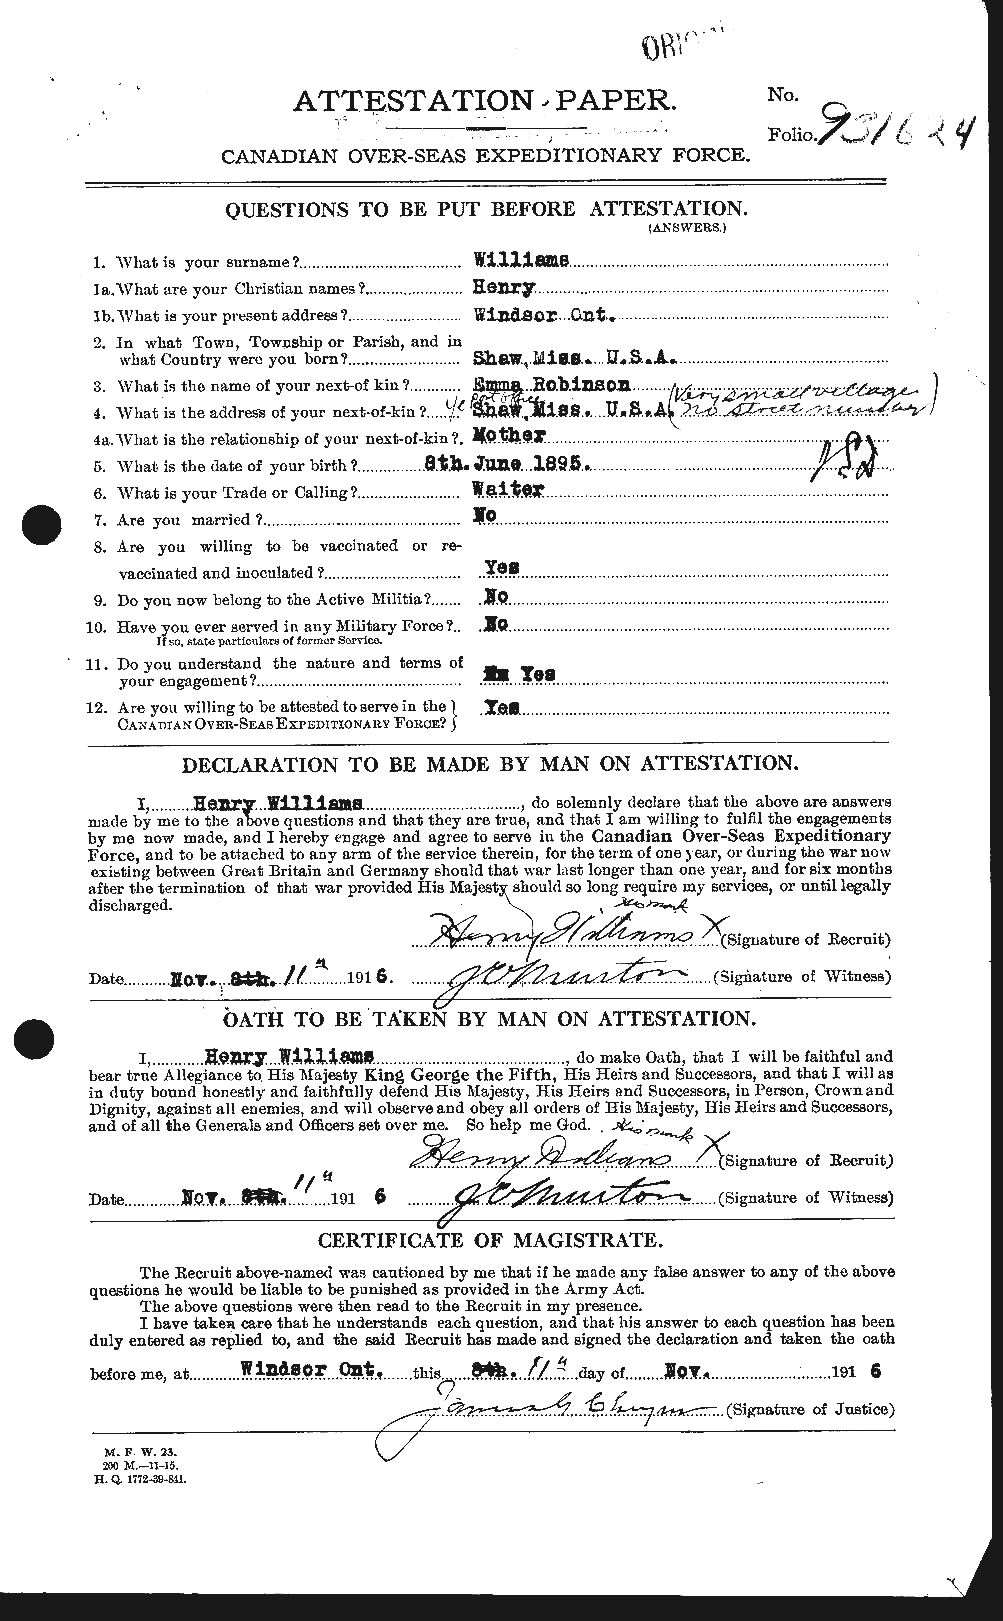 Personnel Records of the First World War - CEF 677391a